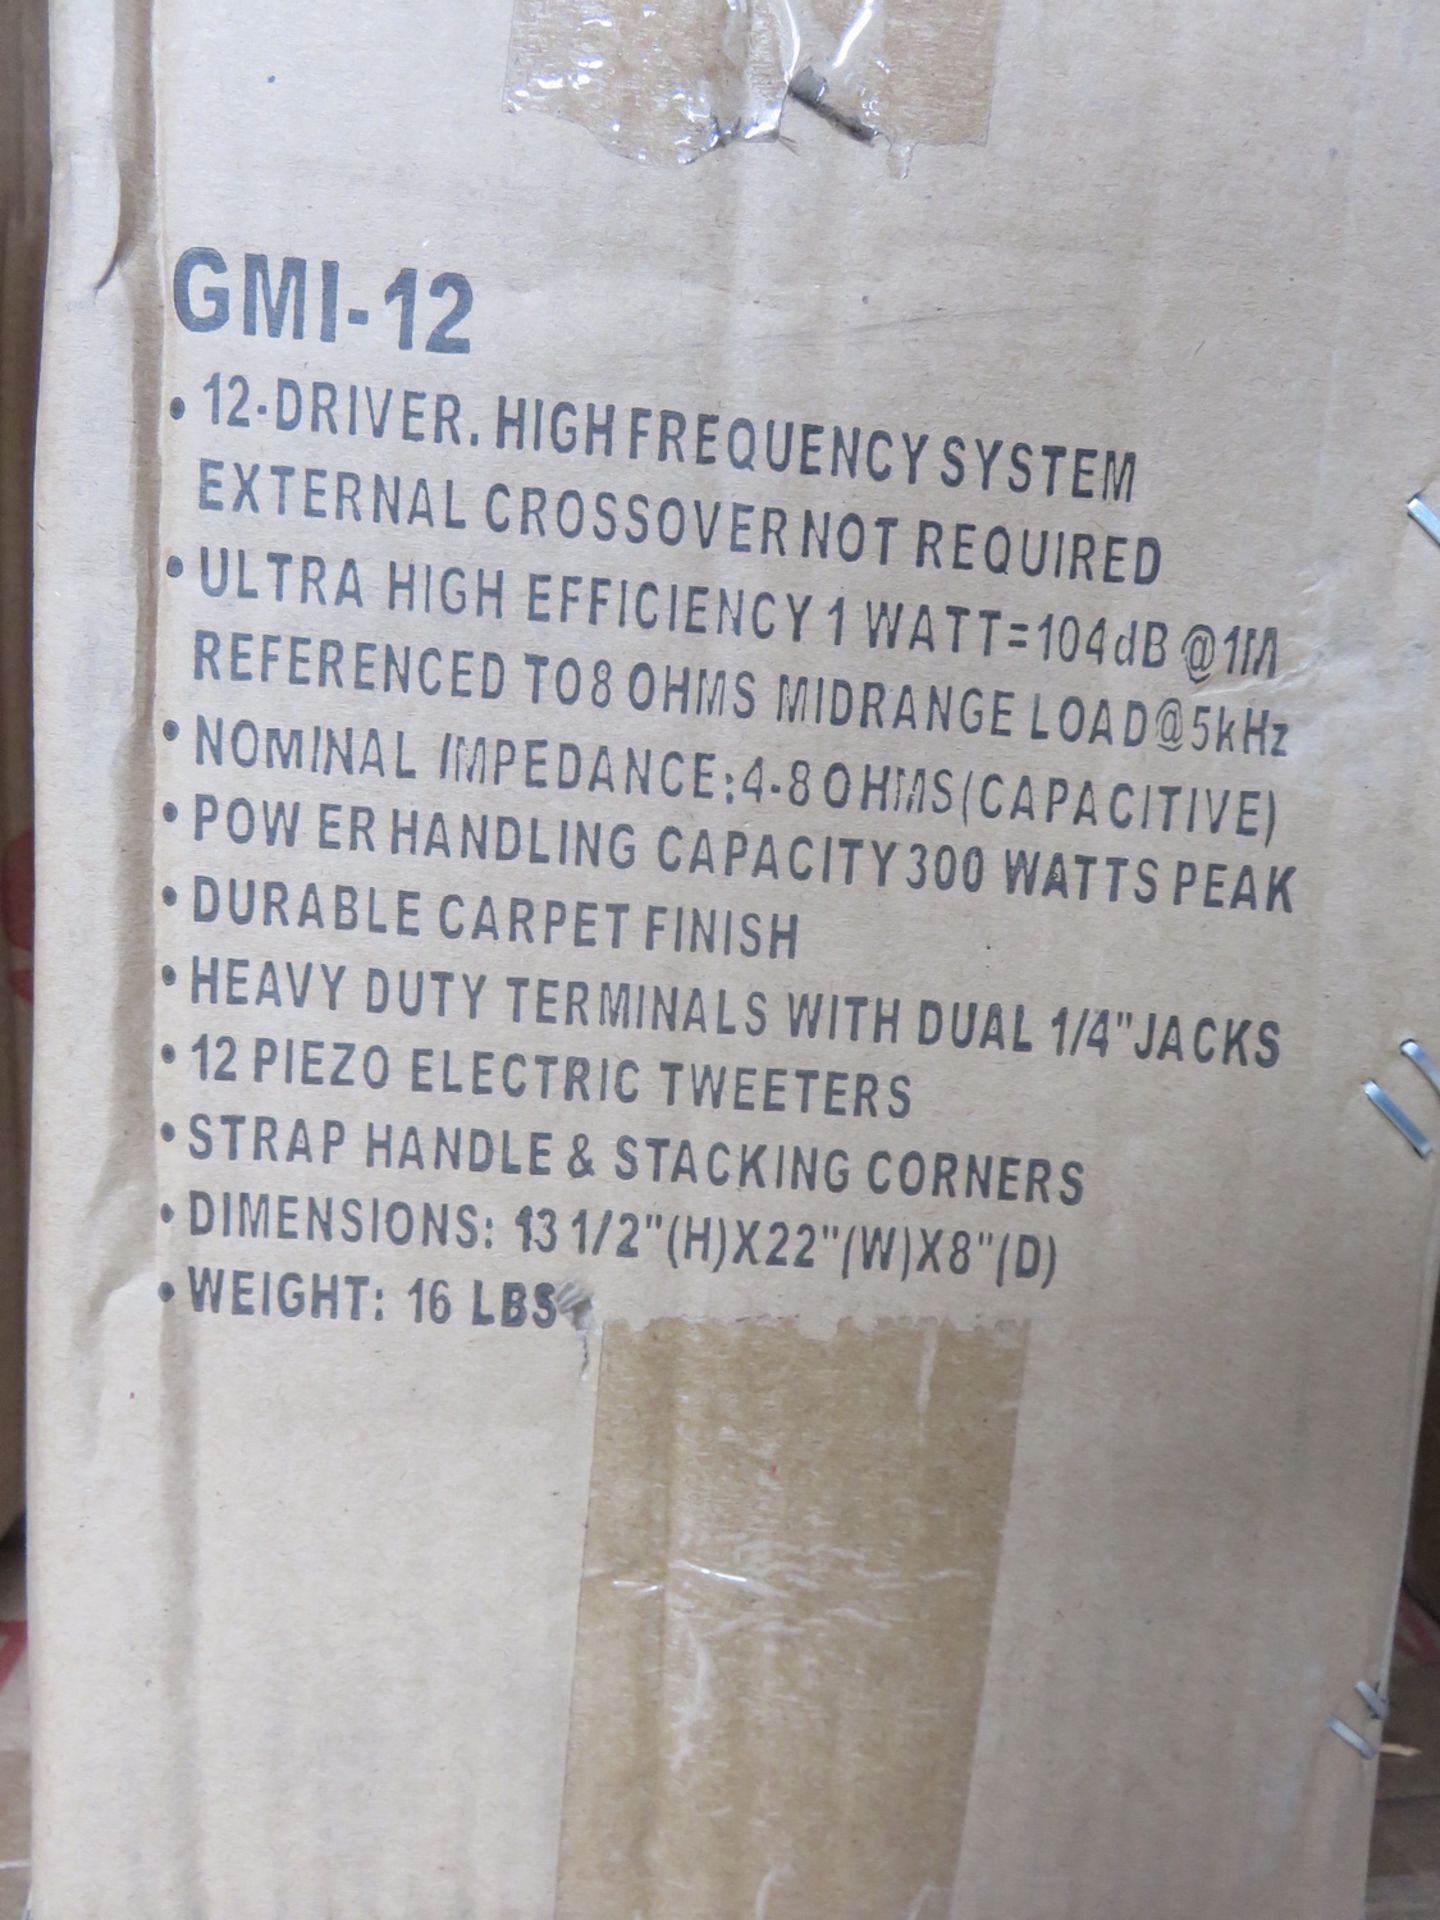 UNITS - GMI MOD 12-DRIVER HIGH FREQUENCY SYSTEM (3 IN BOXES) - 1 (DISPLAY UNIT) - Image 2 of 3